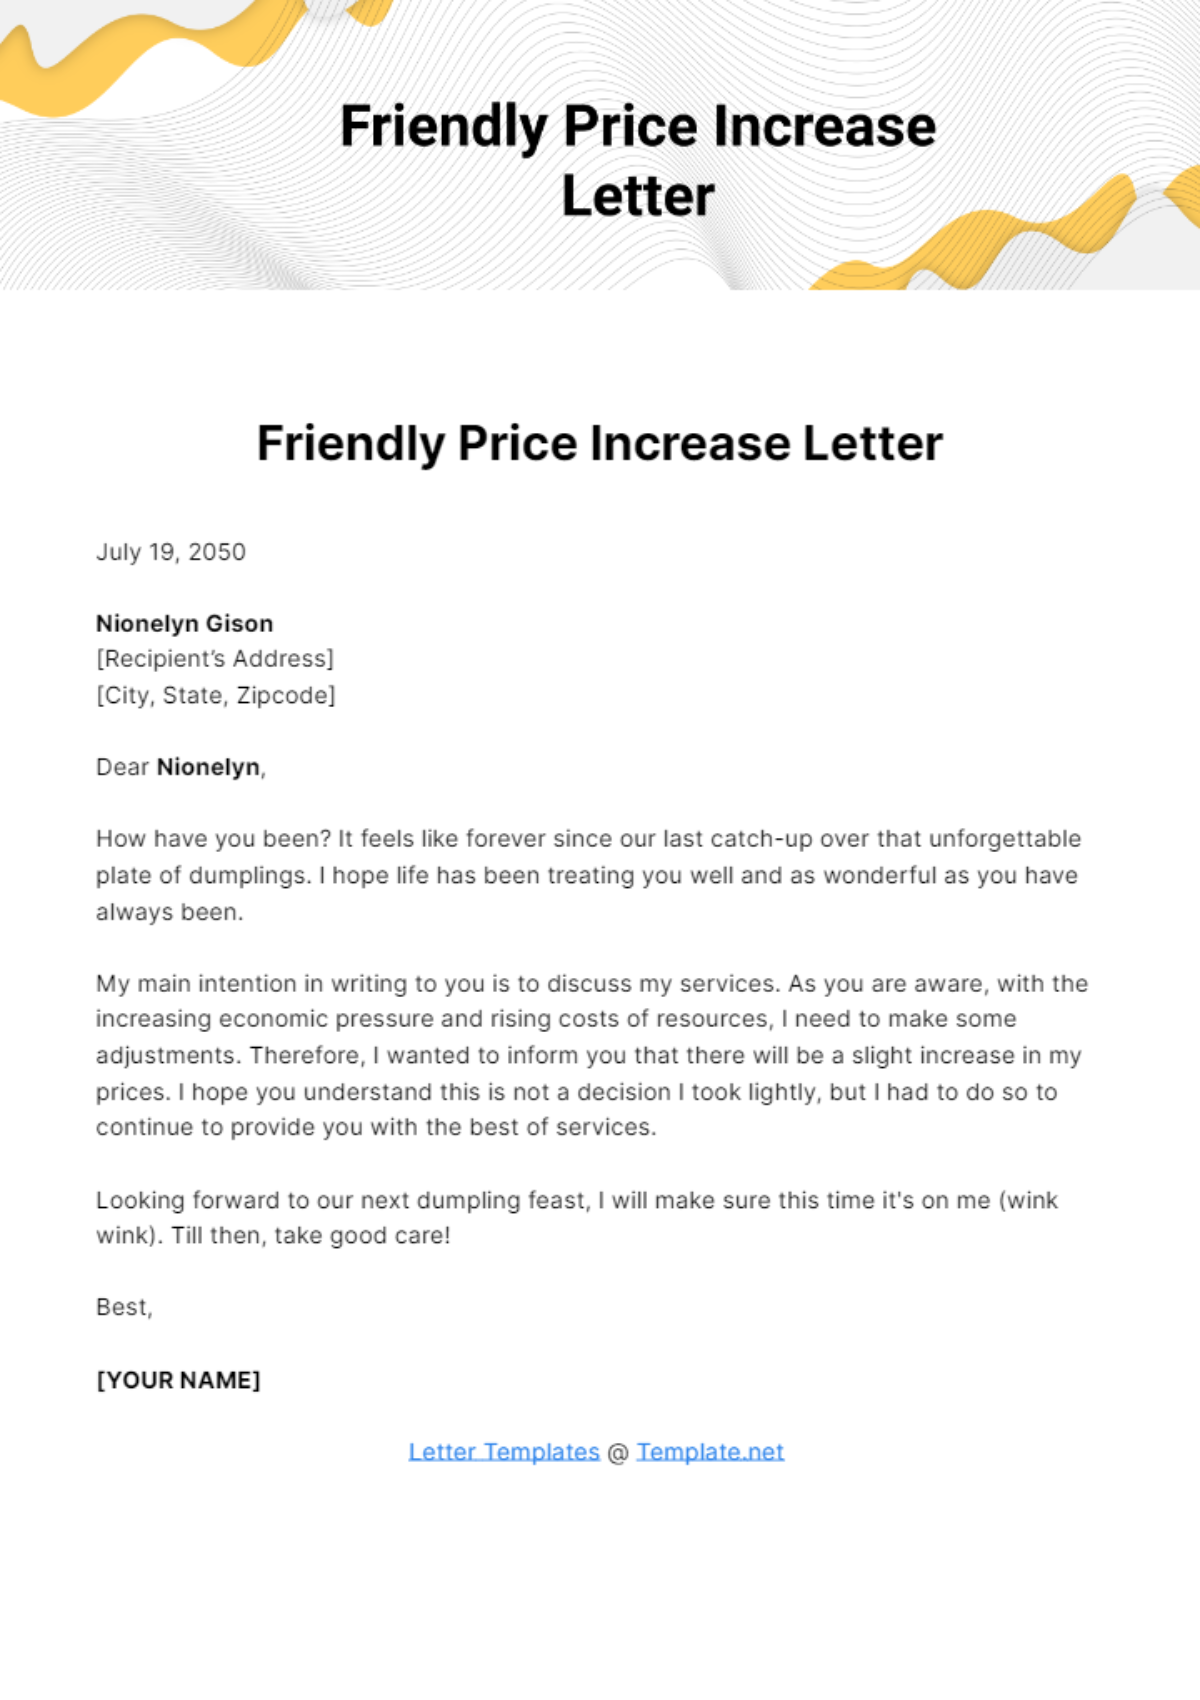 Free Friendly Price Increase Letter Template